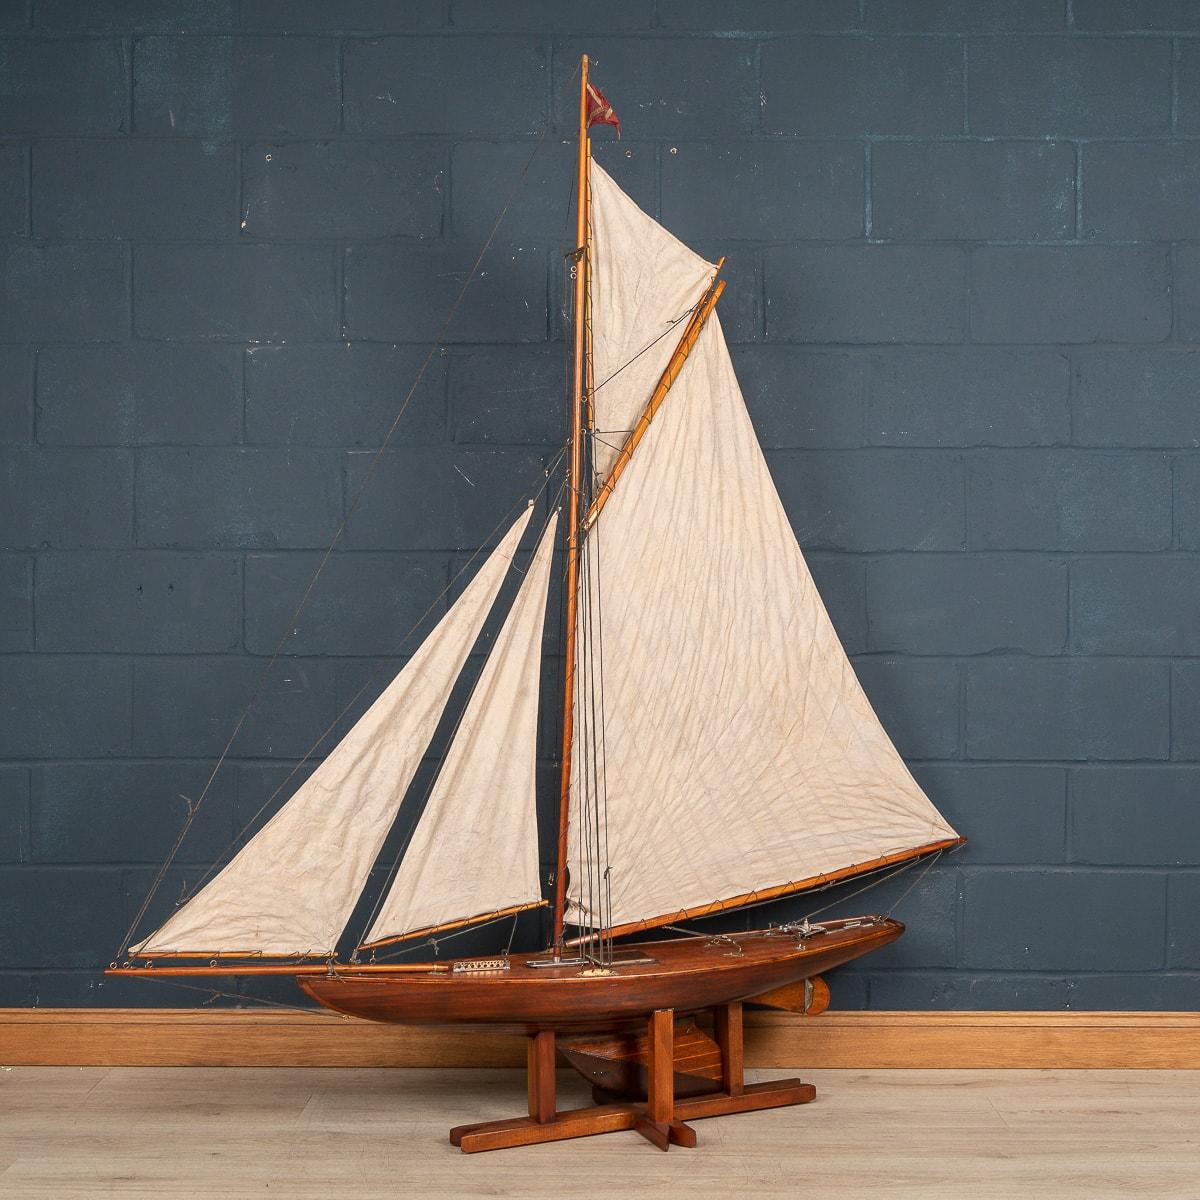 A massive antique gaff rigged cutter pond yacht, lovely “plank on frame” hull dating to the first half of the 20th century. The yacht is an example of British pond racing yacht and would have raced against similar yachts in competitions, club